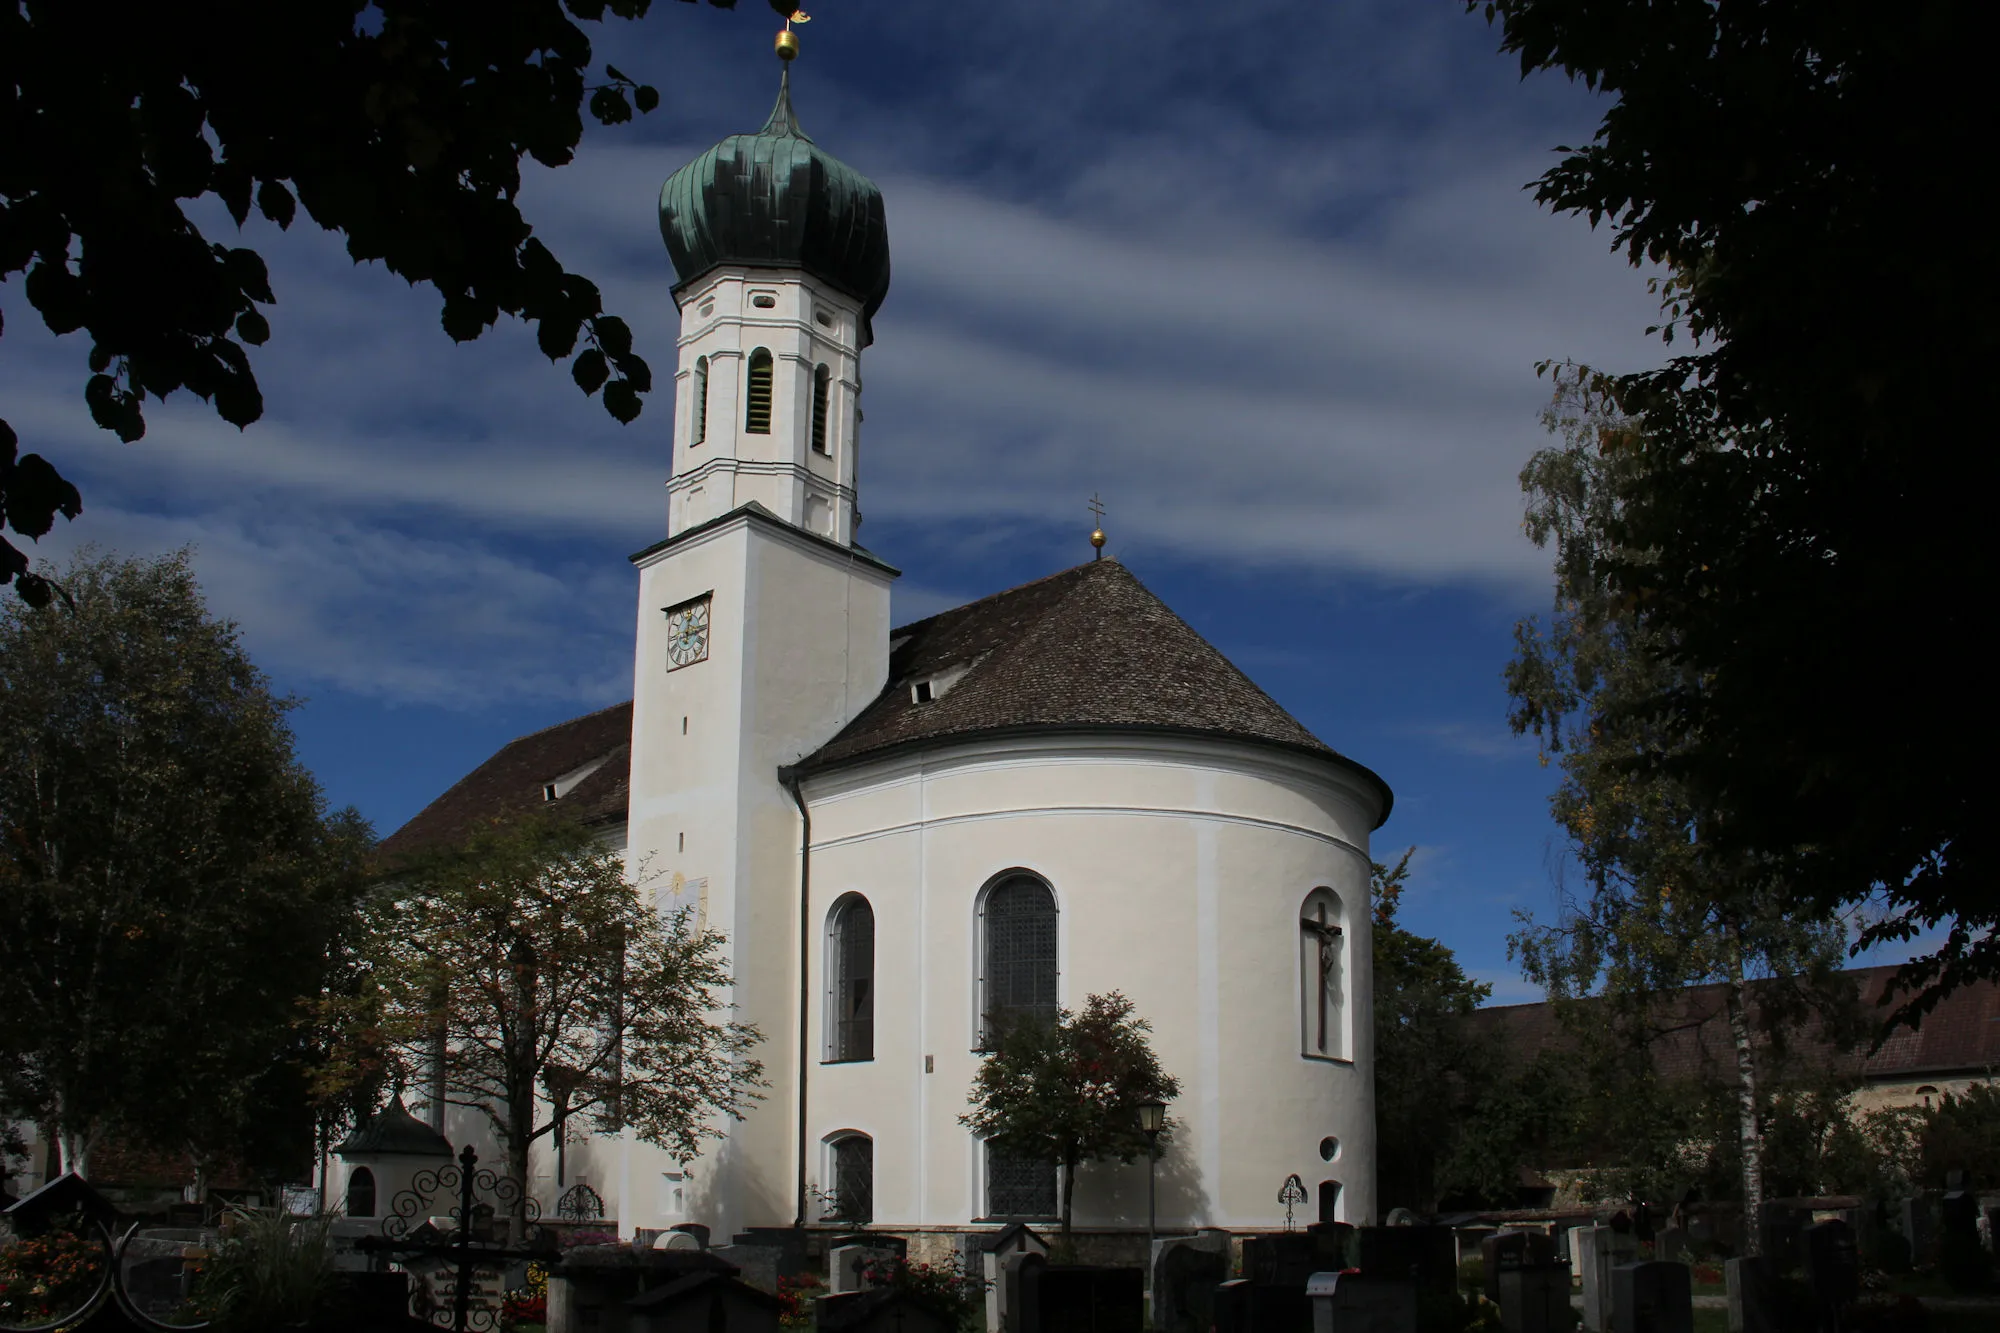 Photo showing: St. Leohard (Rechthal)

Native name
St. Leonhard Location
Bavaria , Germany Coordinates
47° 50′ 47.05″ N, 11° 01′ 45.97″ E Authority file

: Q46813918
institution QS:P195,Q46813918